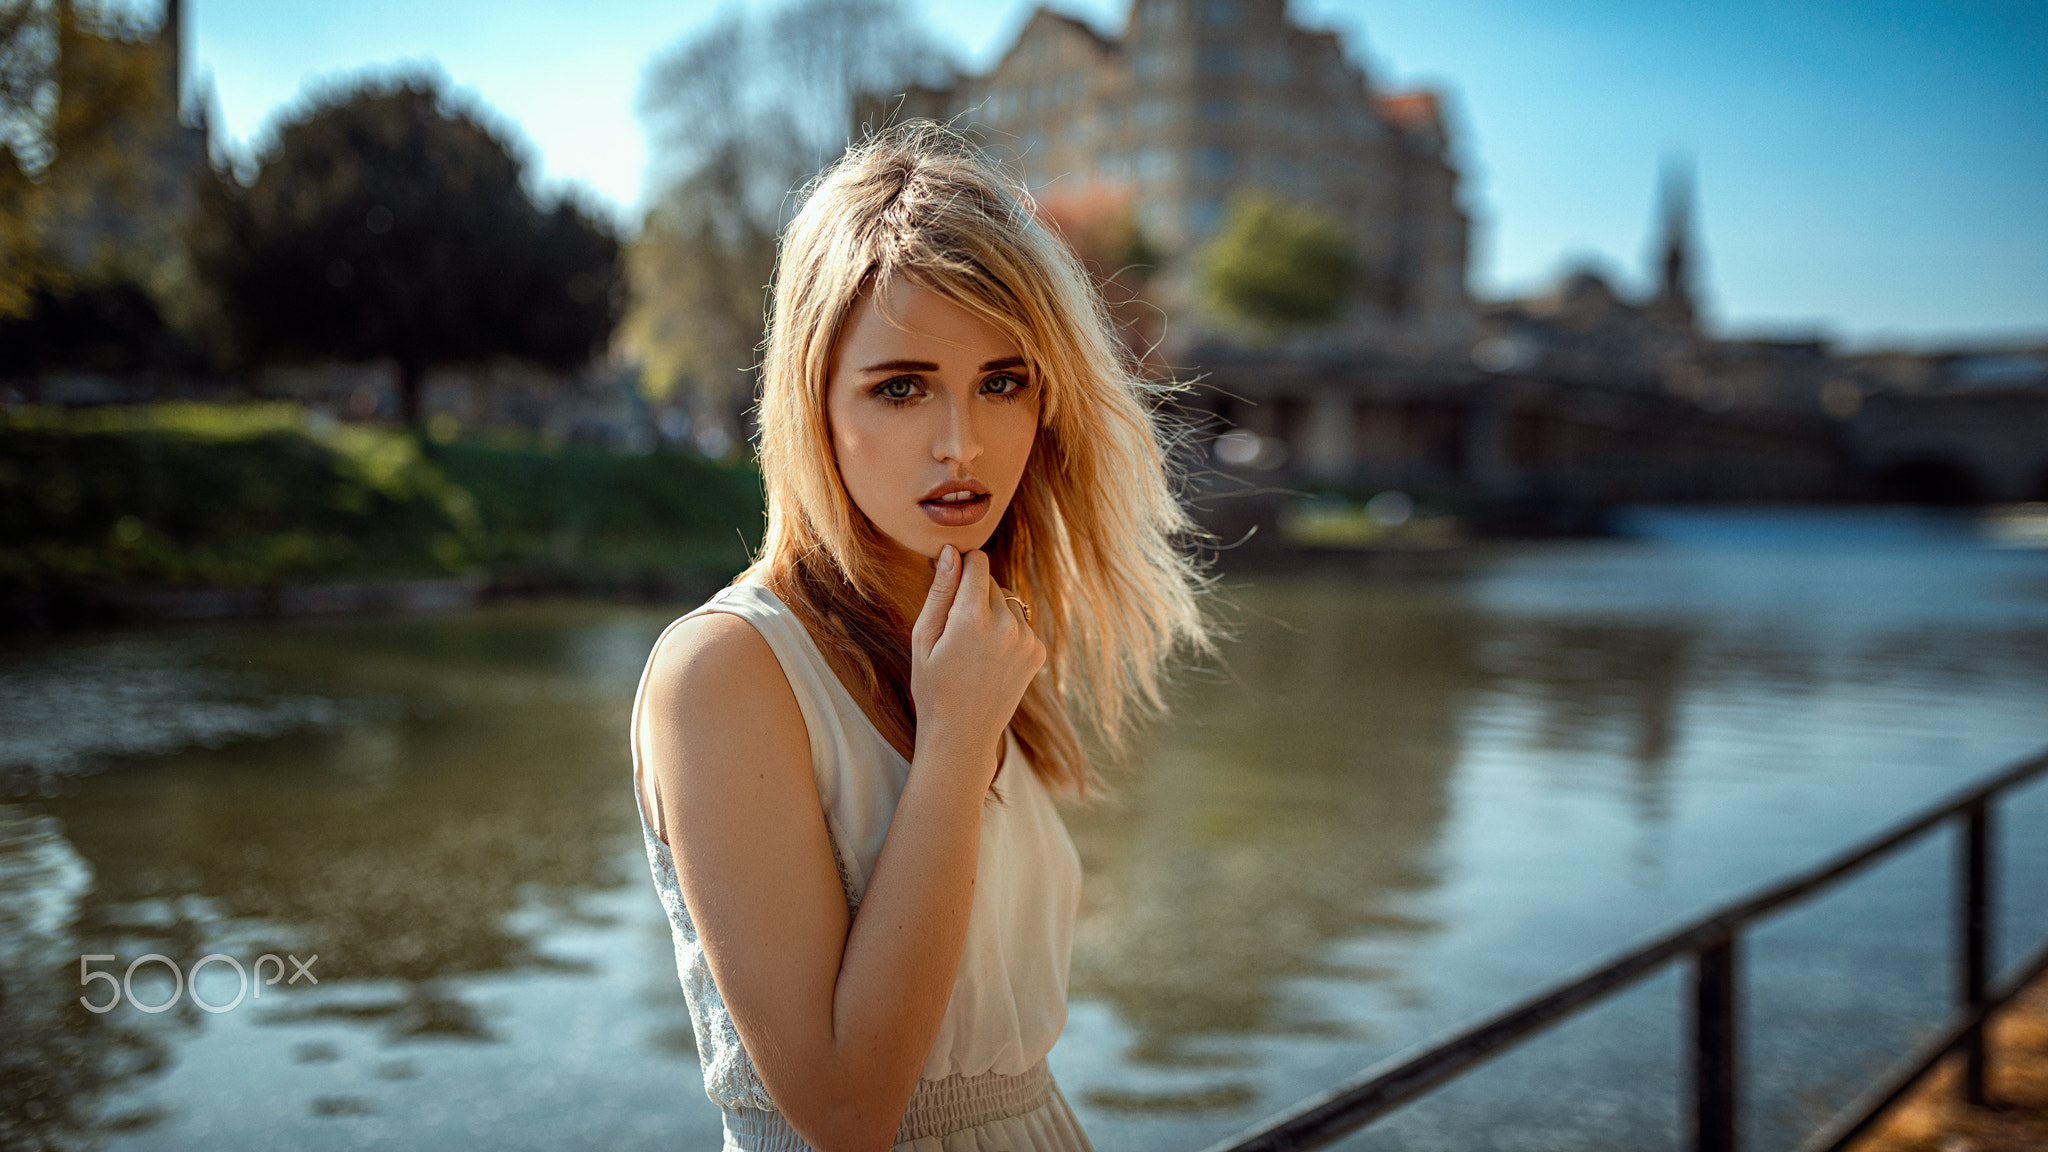 People 2048x1152 women blonde face long hair women outdoors blue eyes riverside tanned river dress portrait Oliver Gibbs 500px urban retouching looking at viewer